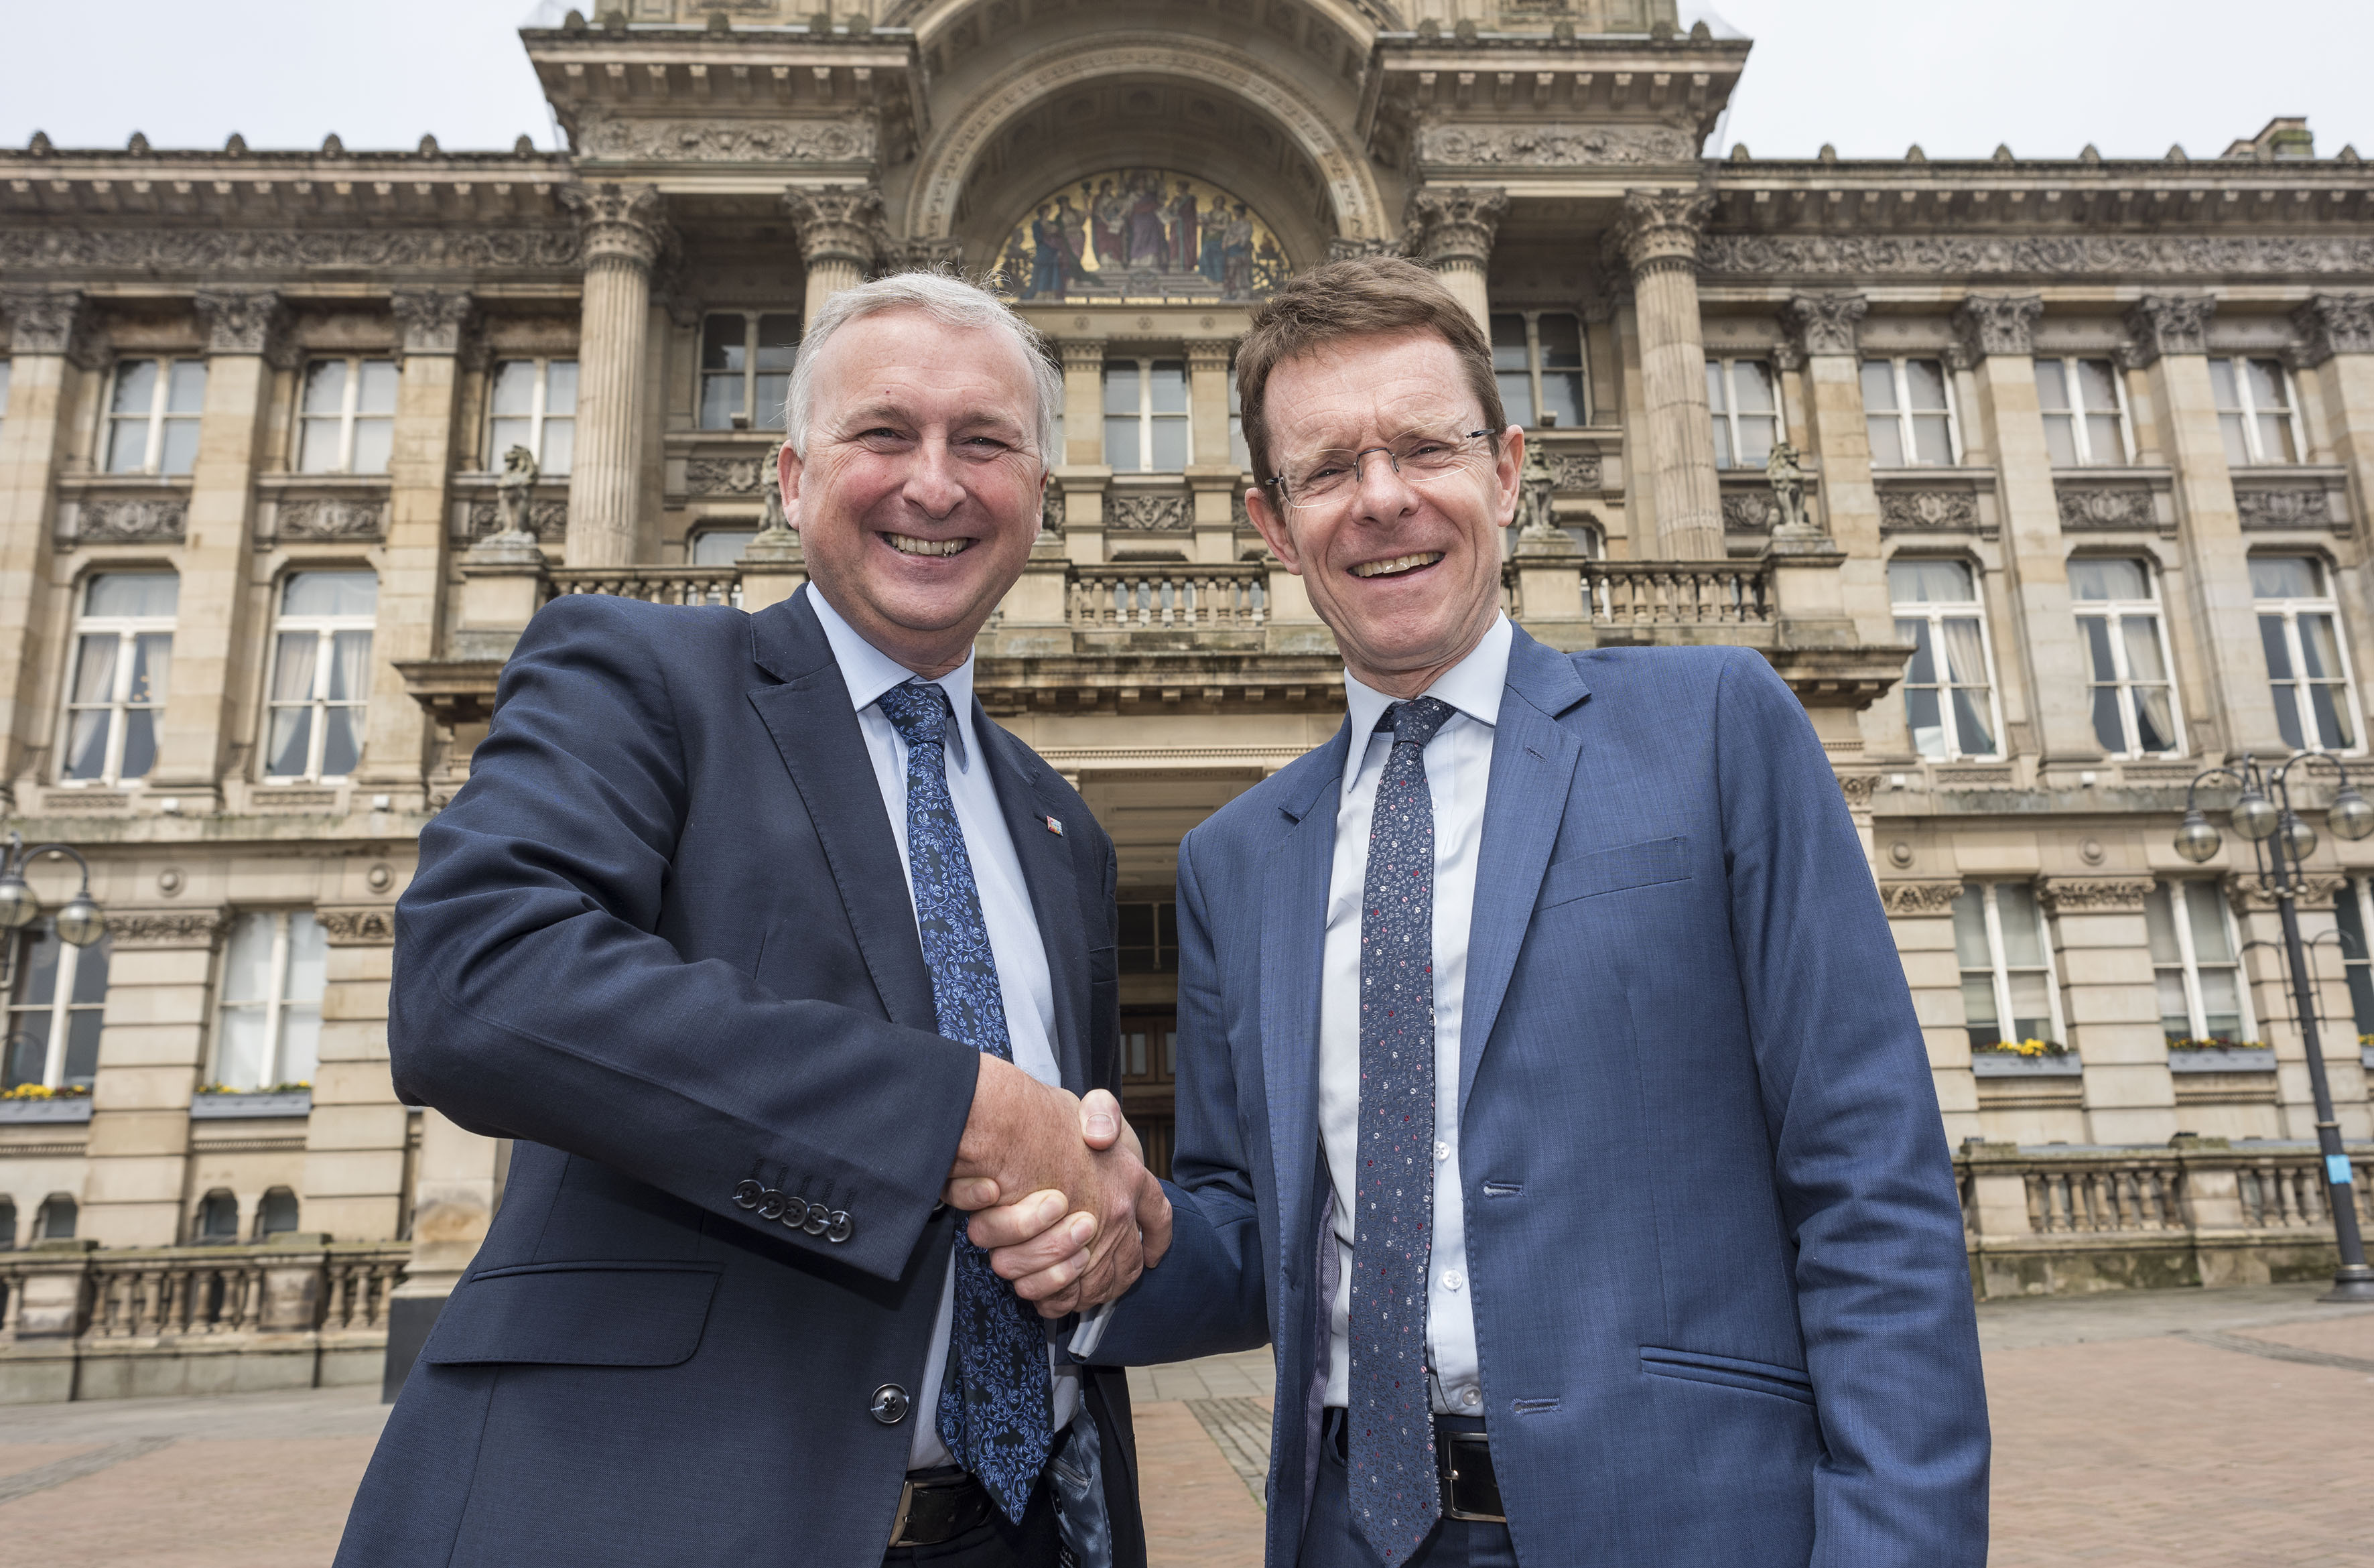 West Midlands Mayor Andy Street (right) offers Cllr Ian Ward, deputy leader of Birmingham City Council, the region’s formal backing for the city’s 2022 Commonwealth Games bid.